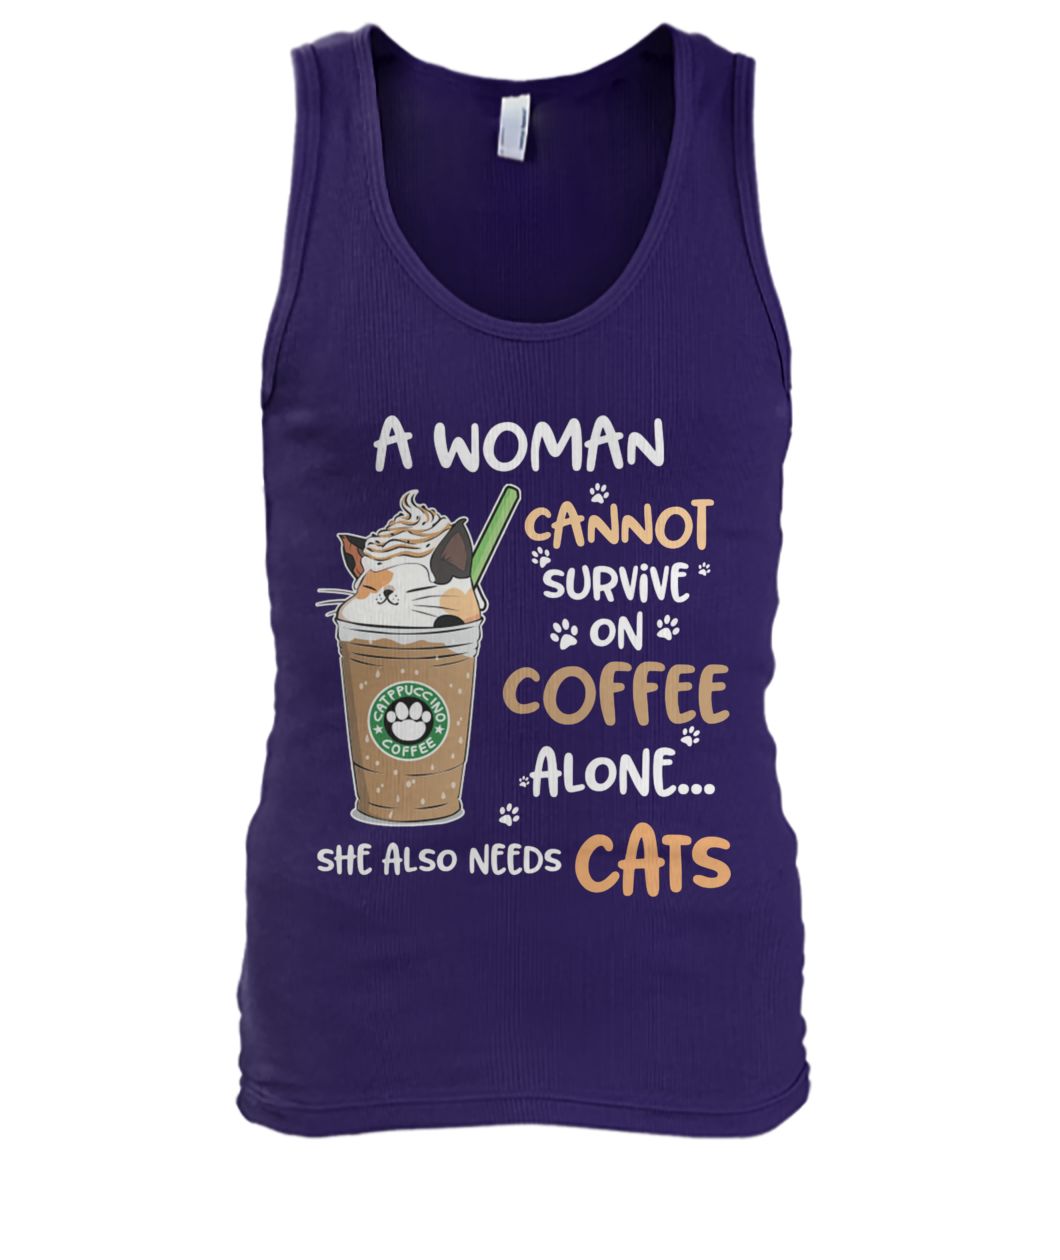 A woman cannot survive on coffee alone she also needs cats men's tank top